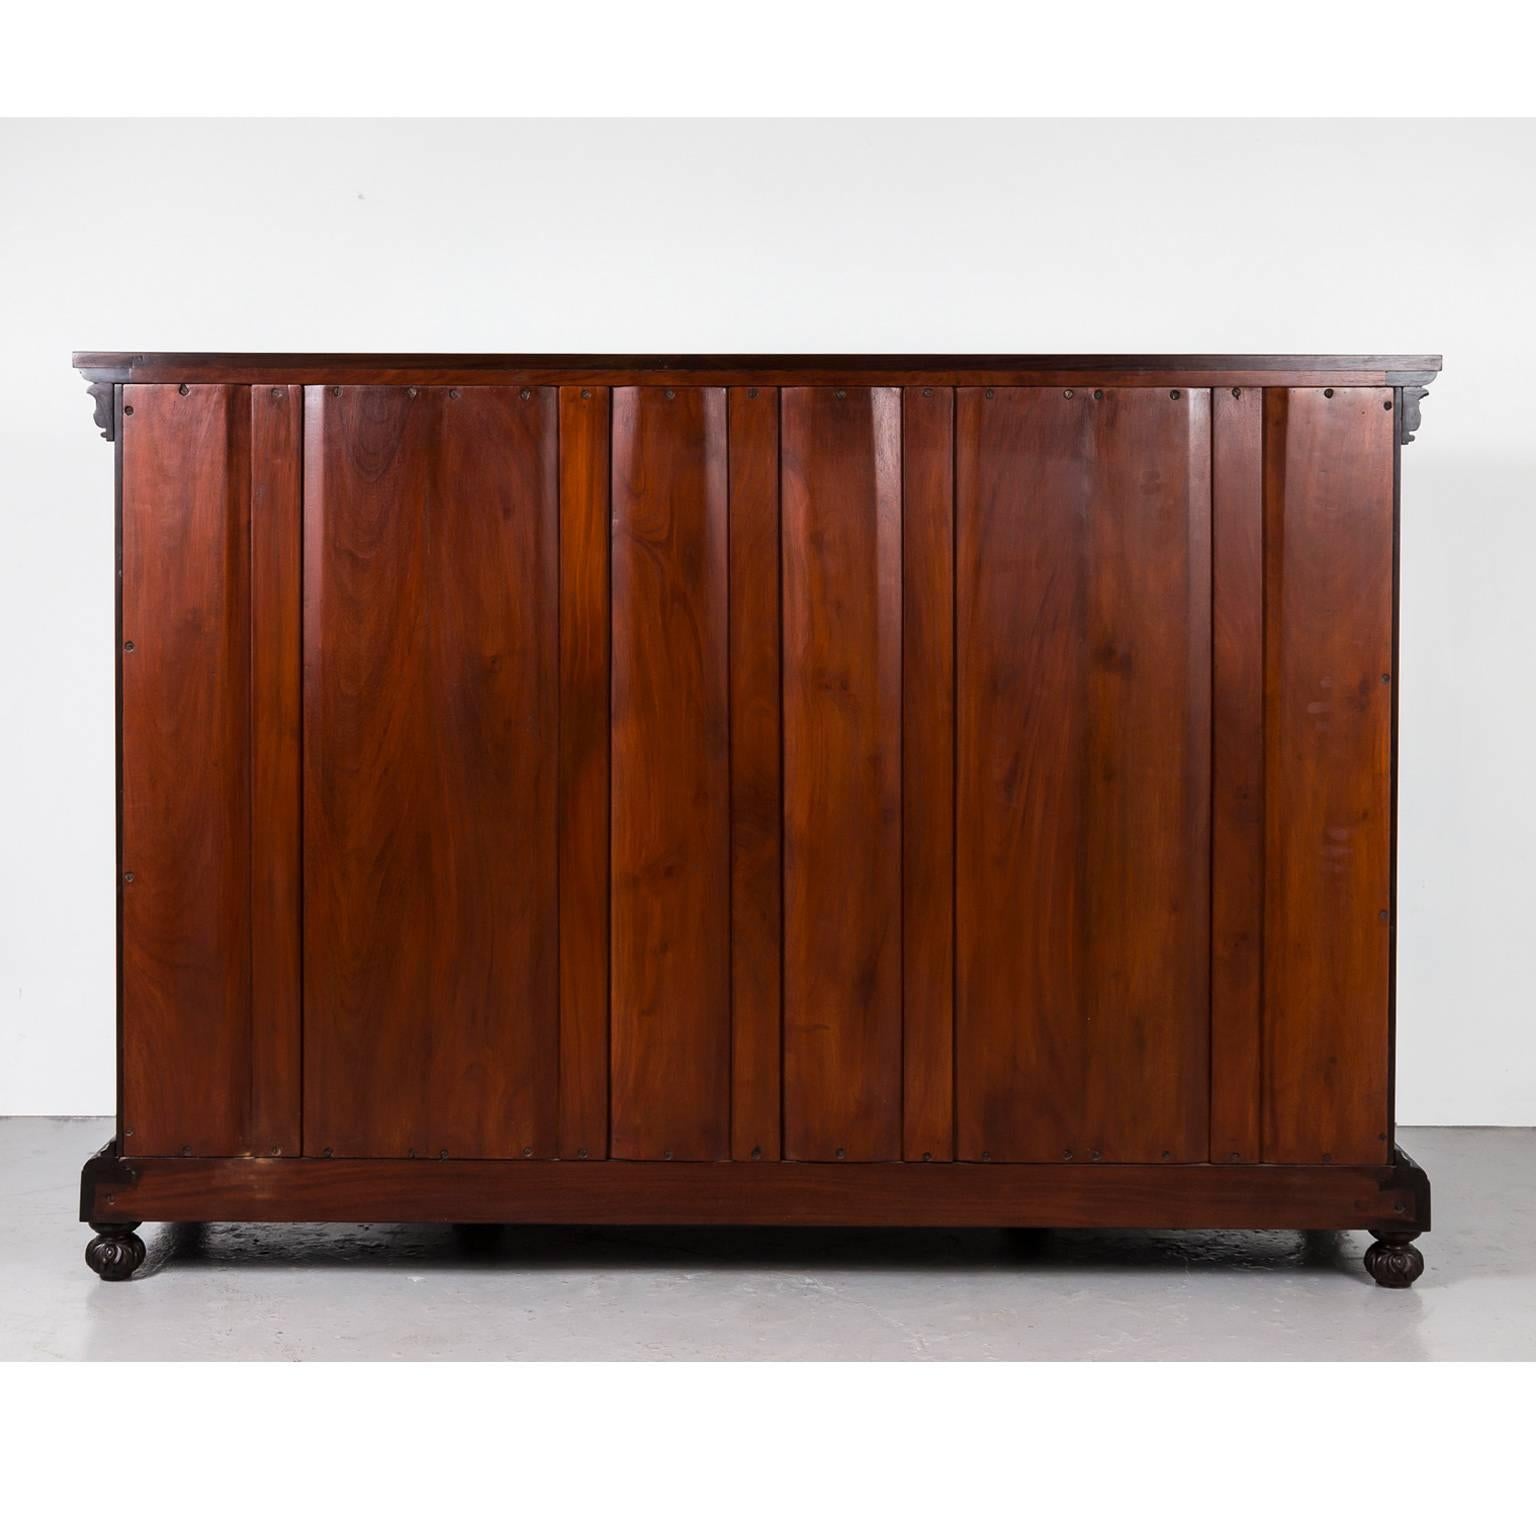 Anglo-Indian or British Colonial Rosewood Breakfront Cabinet 5